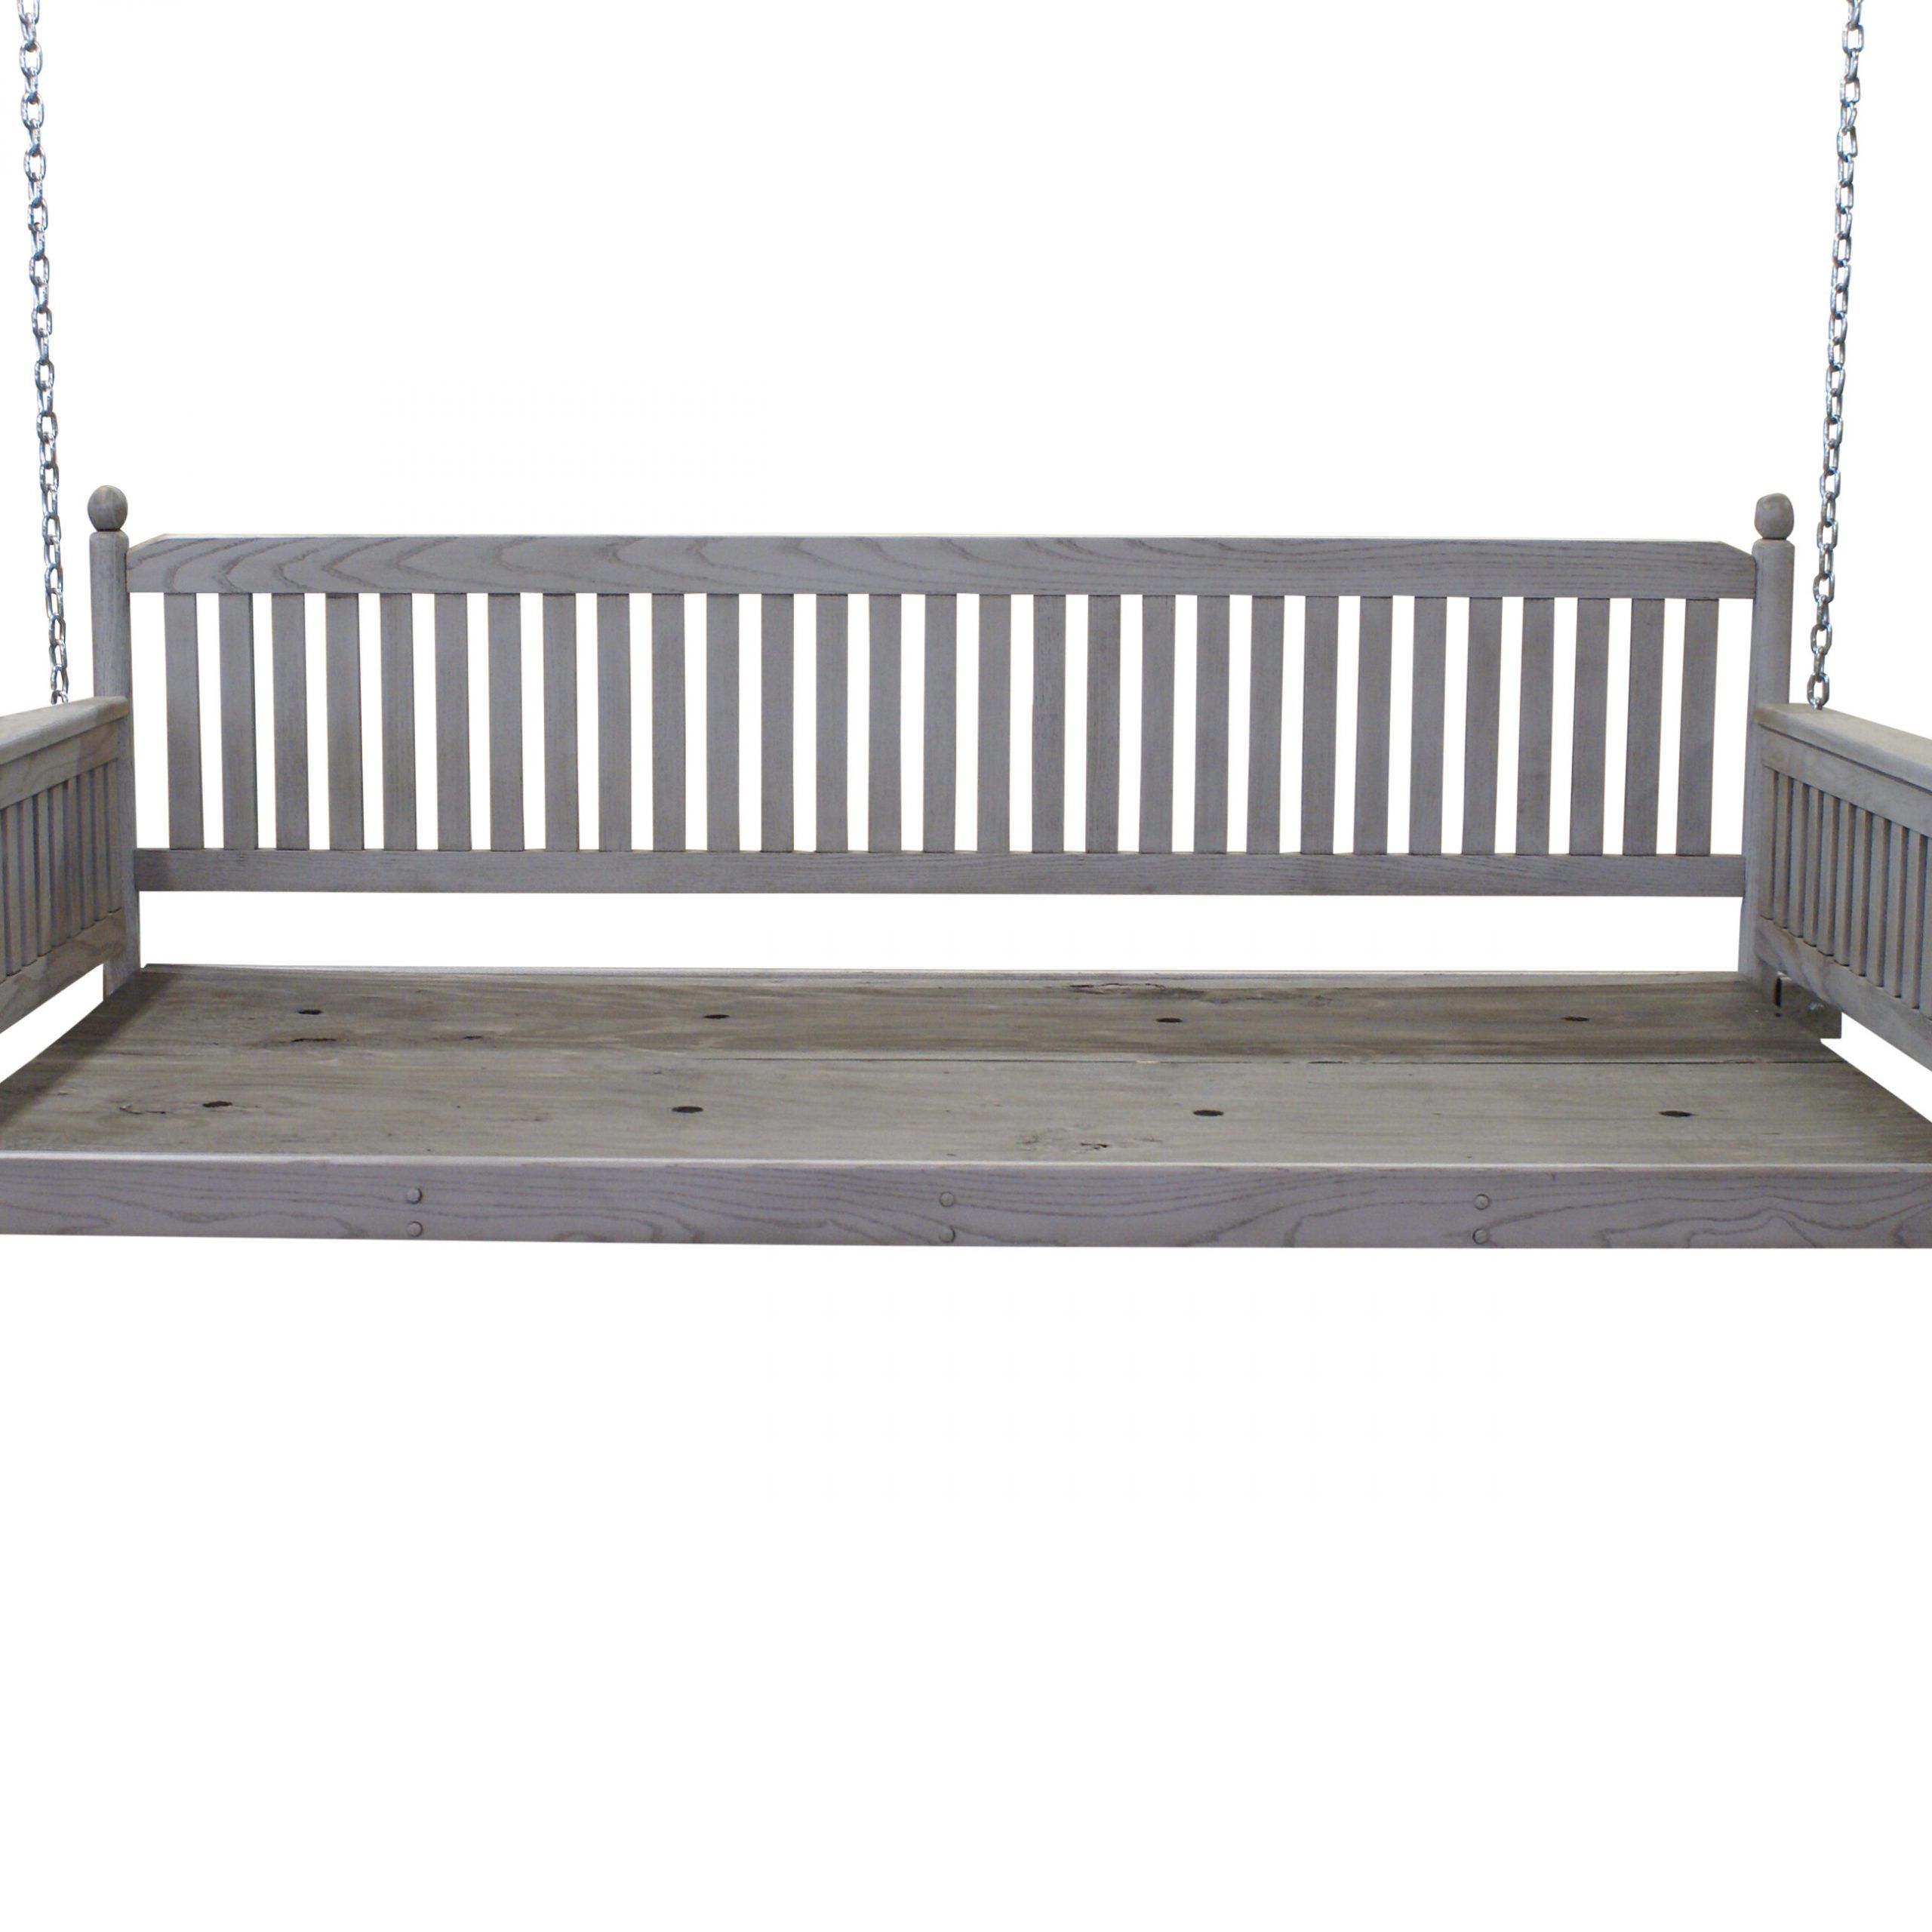 2019 Cano Day Bed Porch Swing Pertaining To Day Bed Porch Swings (View 8 of 25)